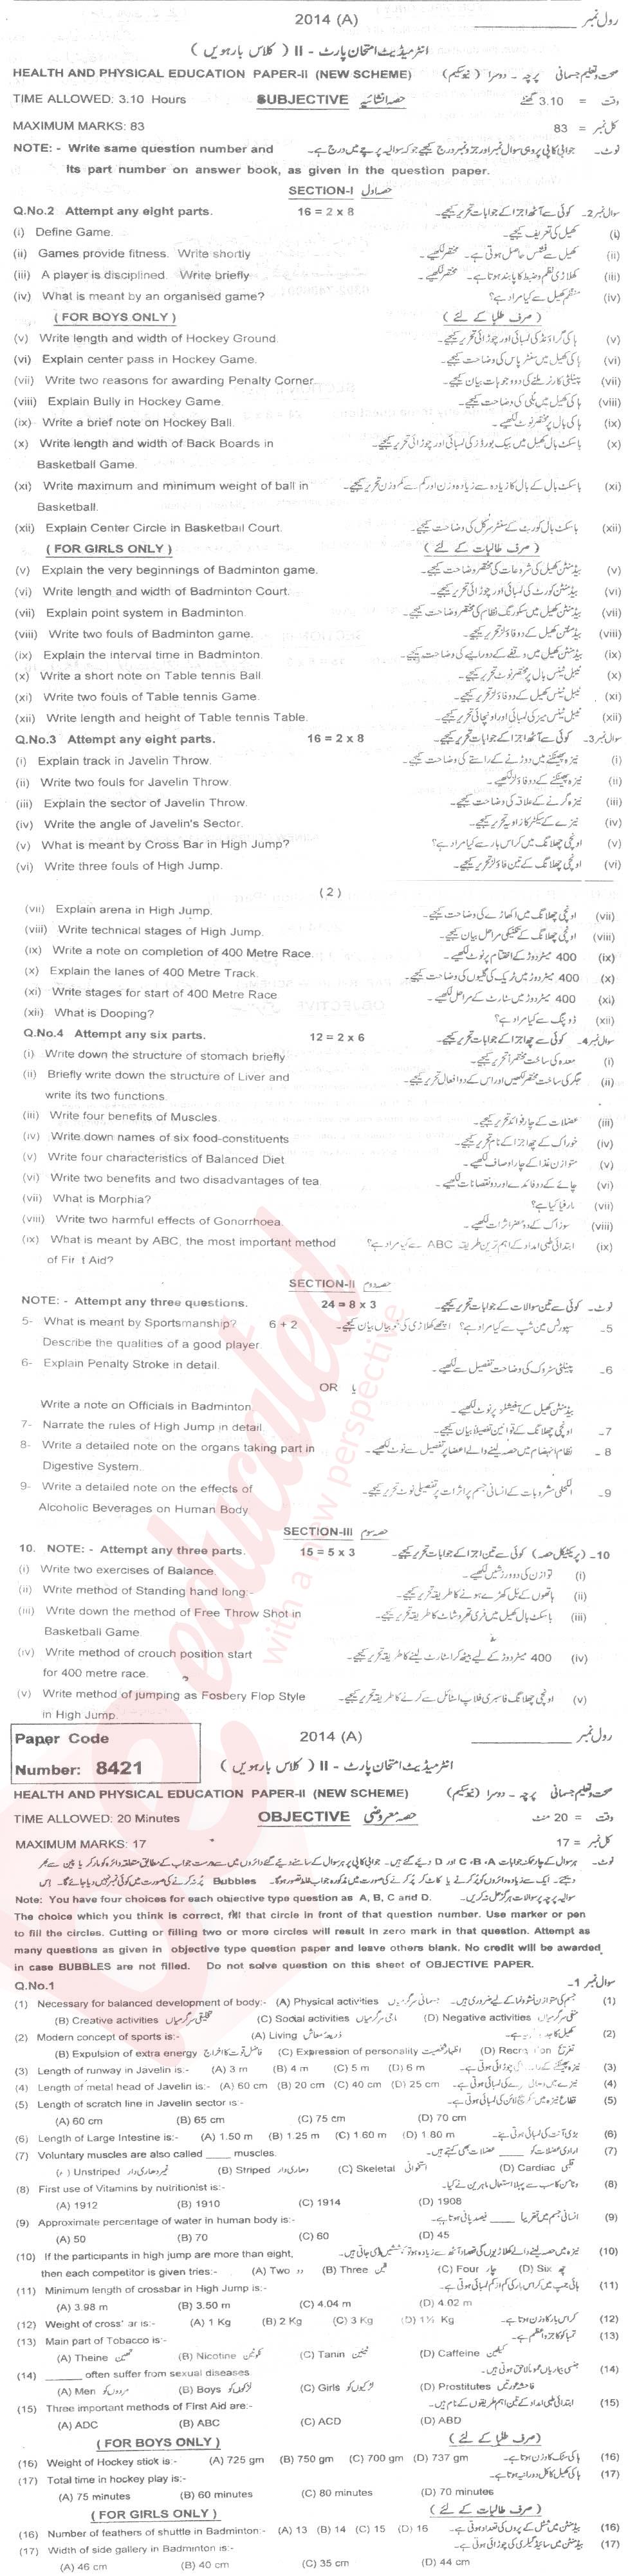 Health and Physical Education FA Part 2 Past Paper Group 1 BISE Multan 2014